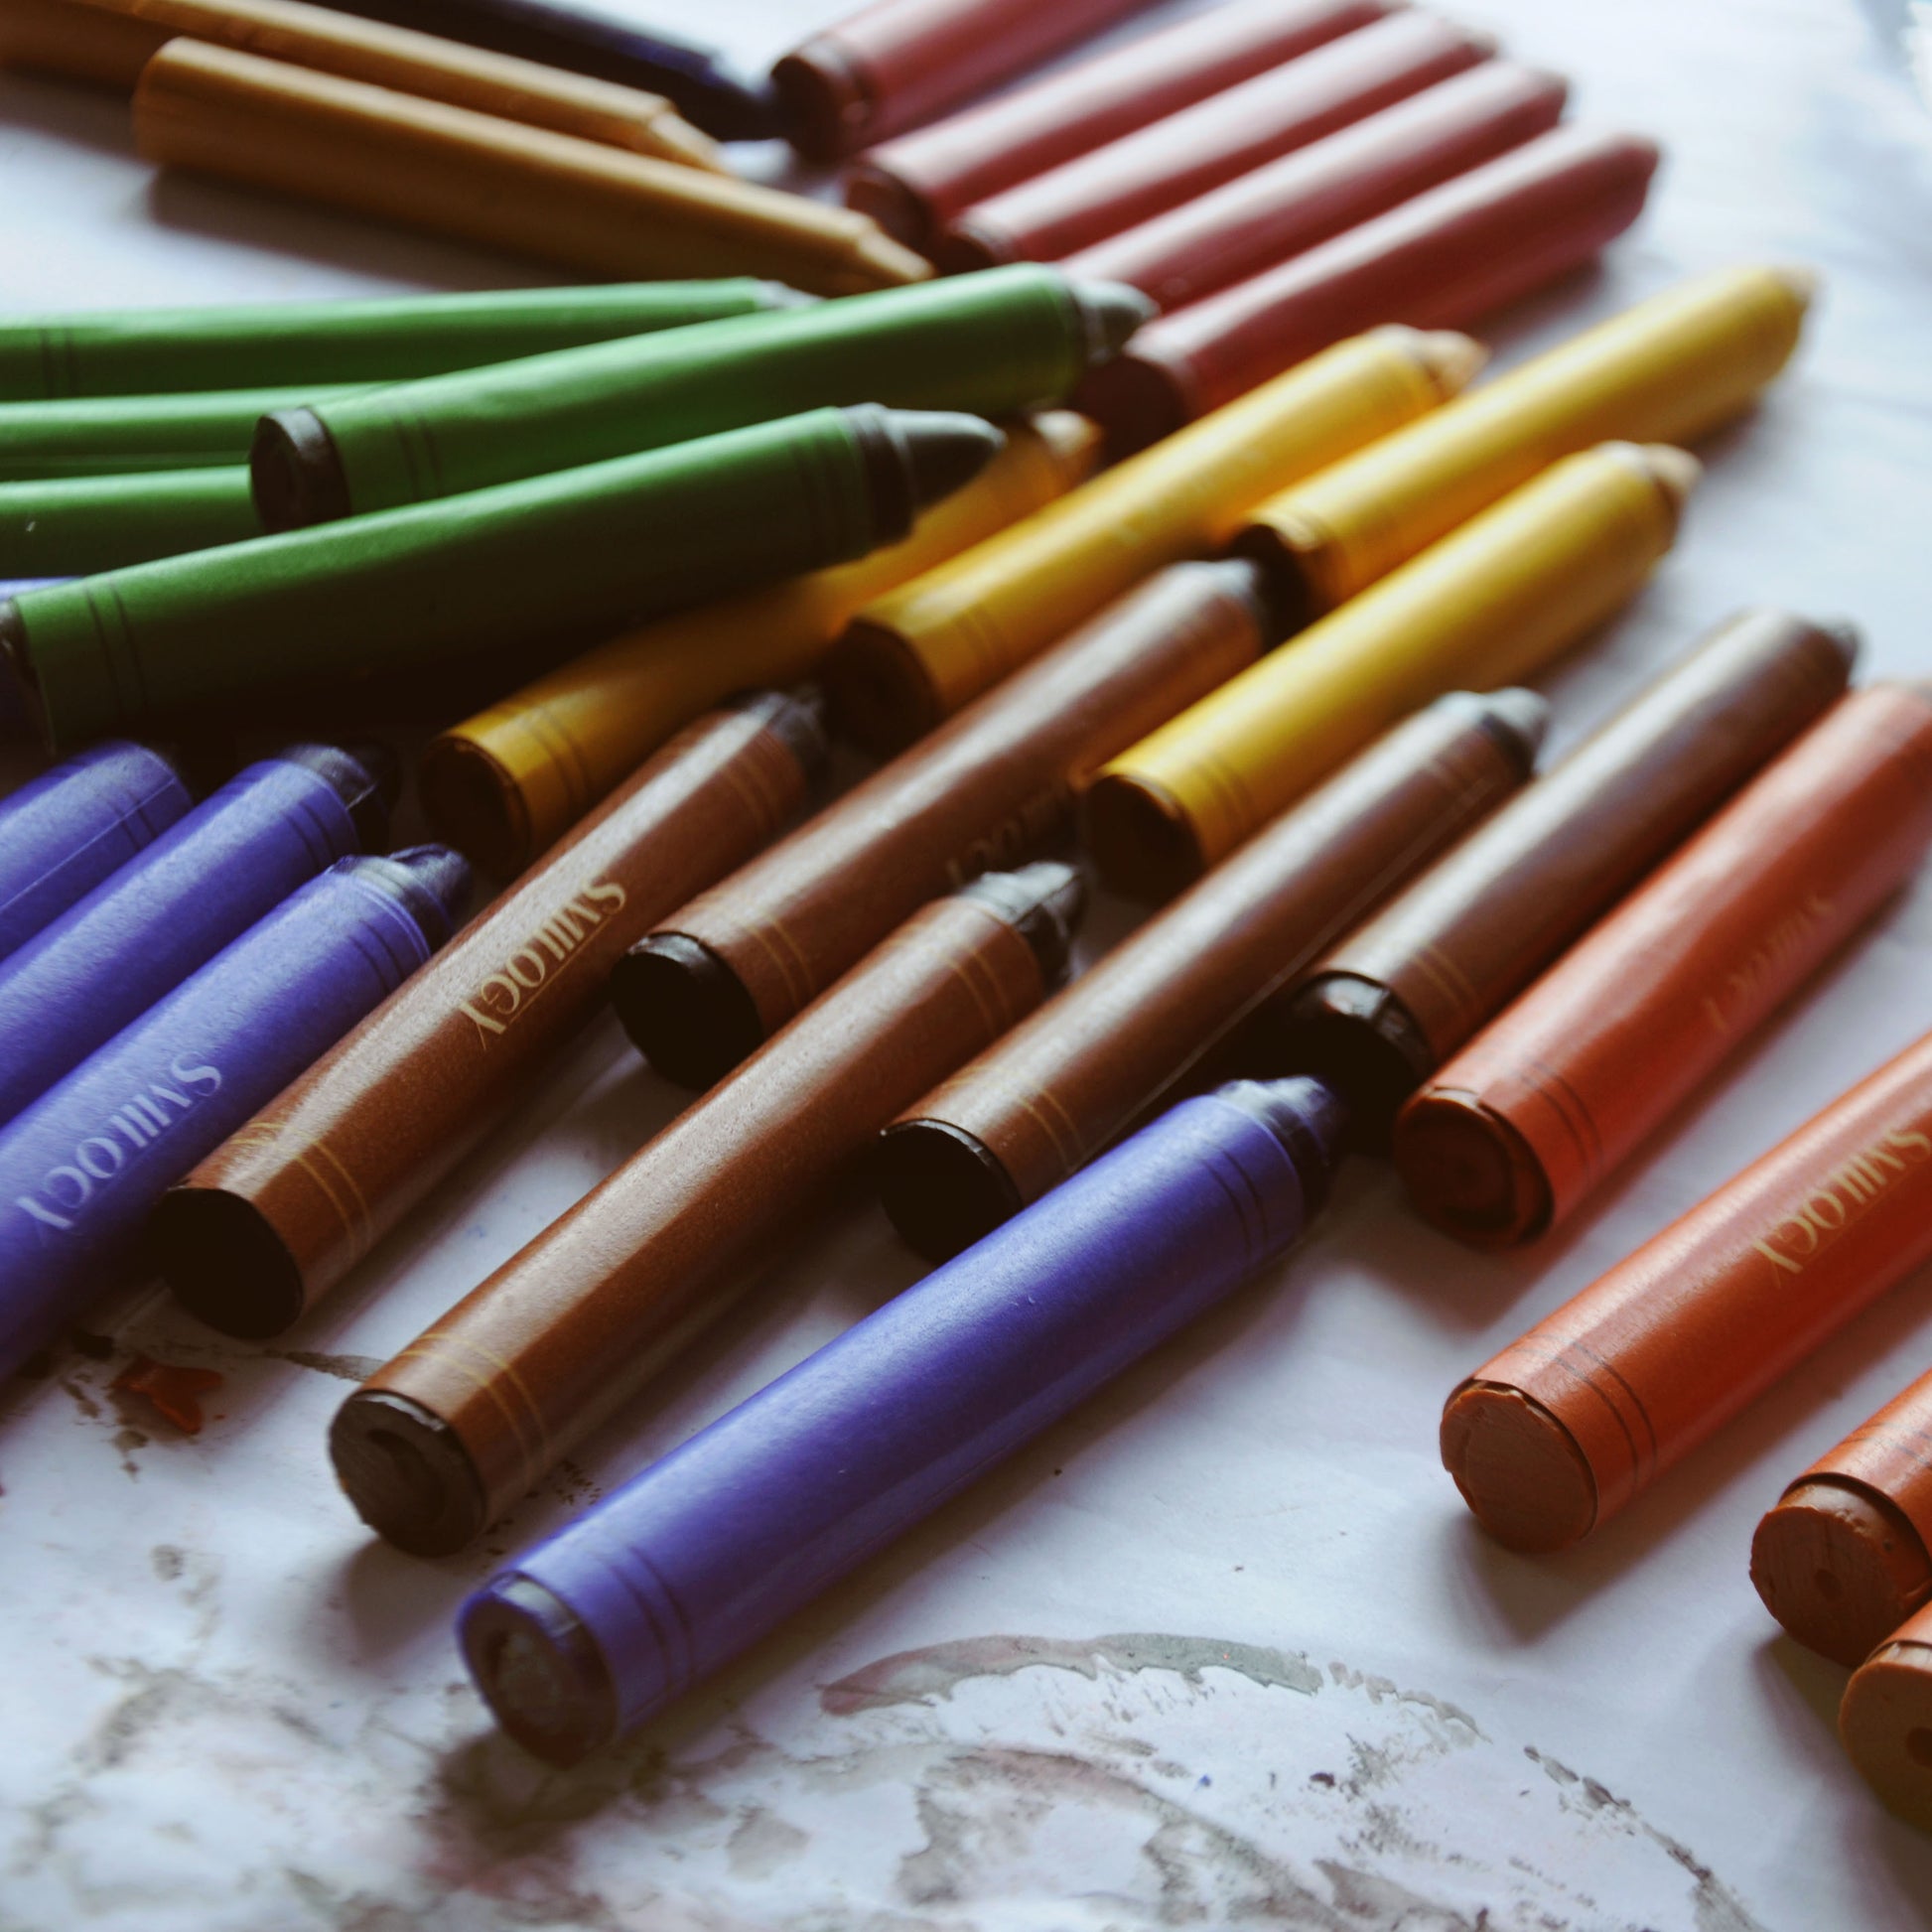  all natural beeswax crayons for kids spread on a white paper surface